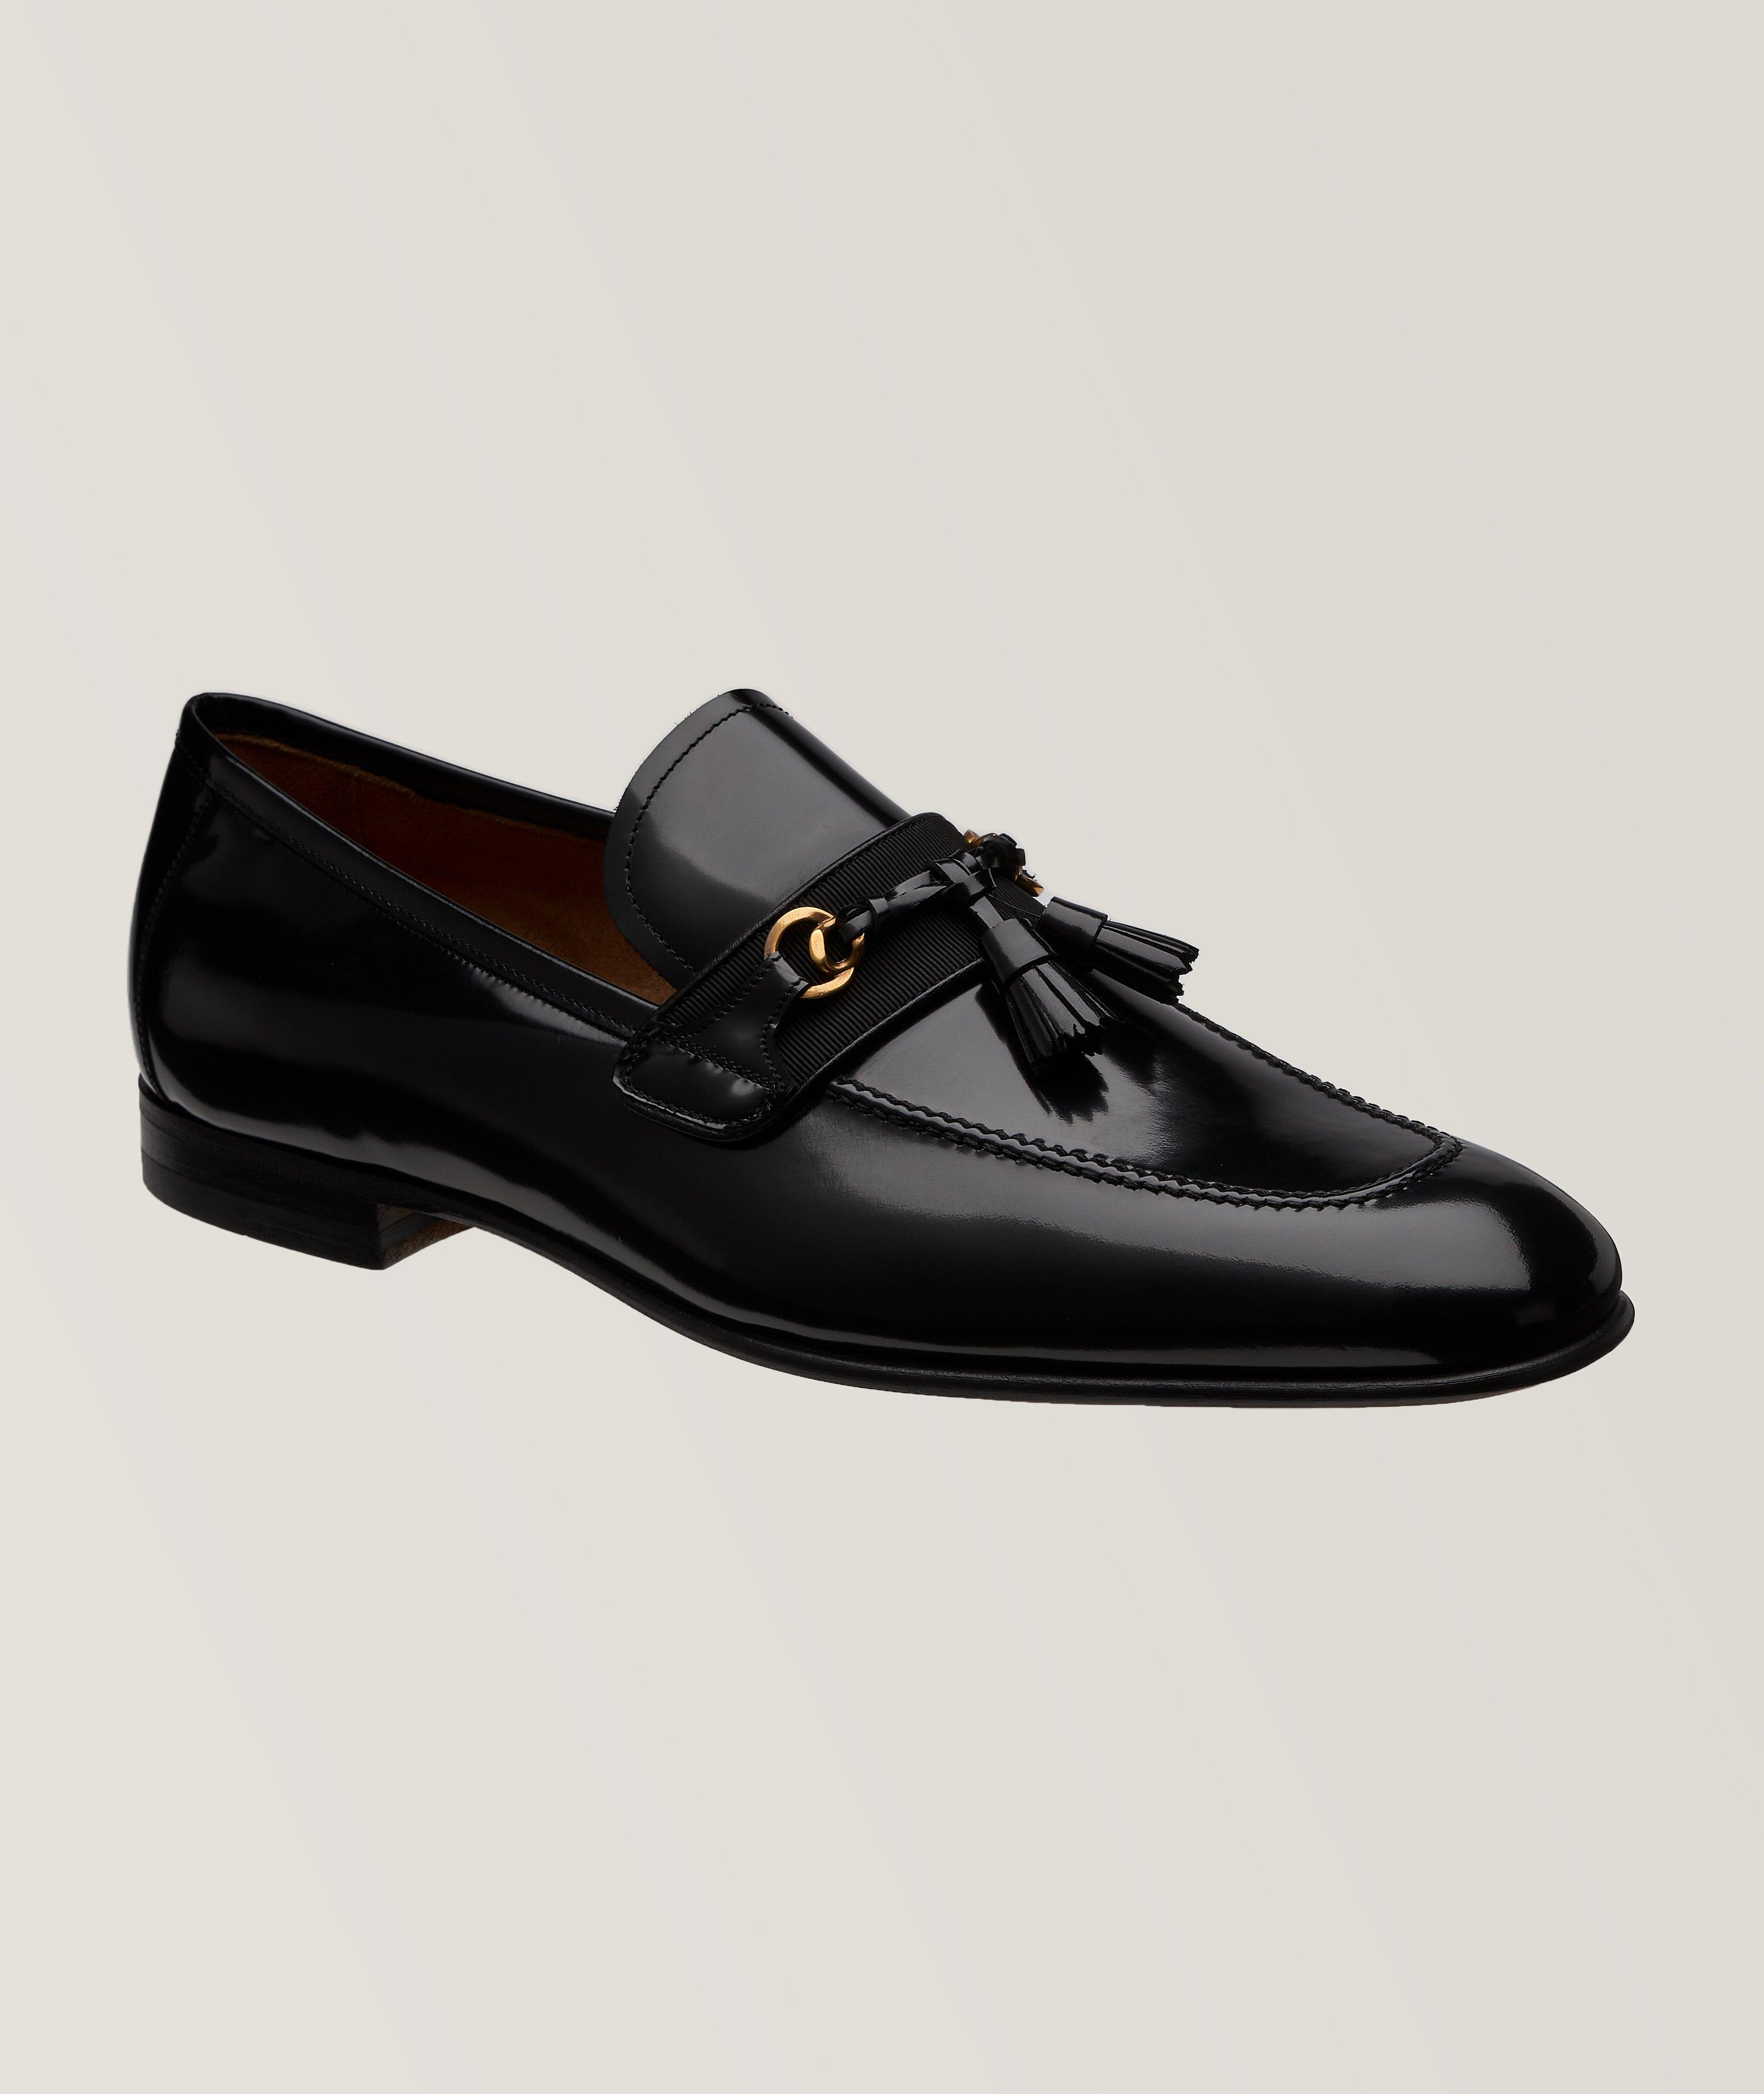 TOM FORD Sean Patent Leather Tassel Loafers